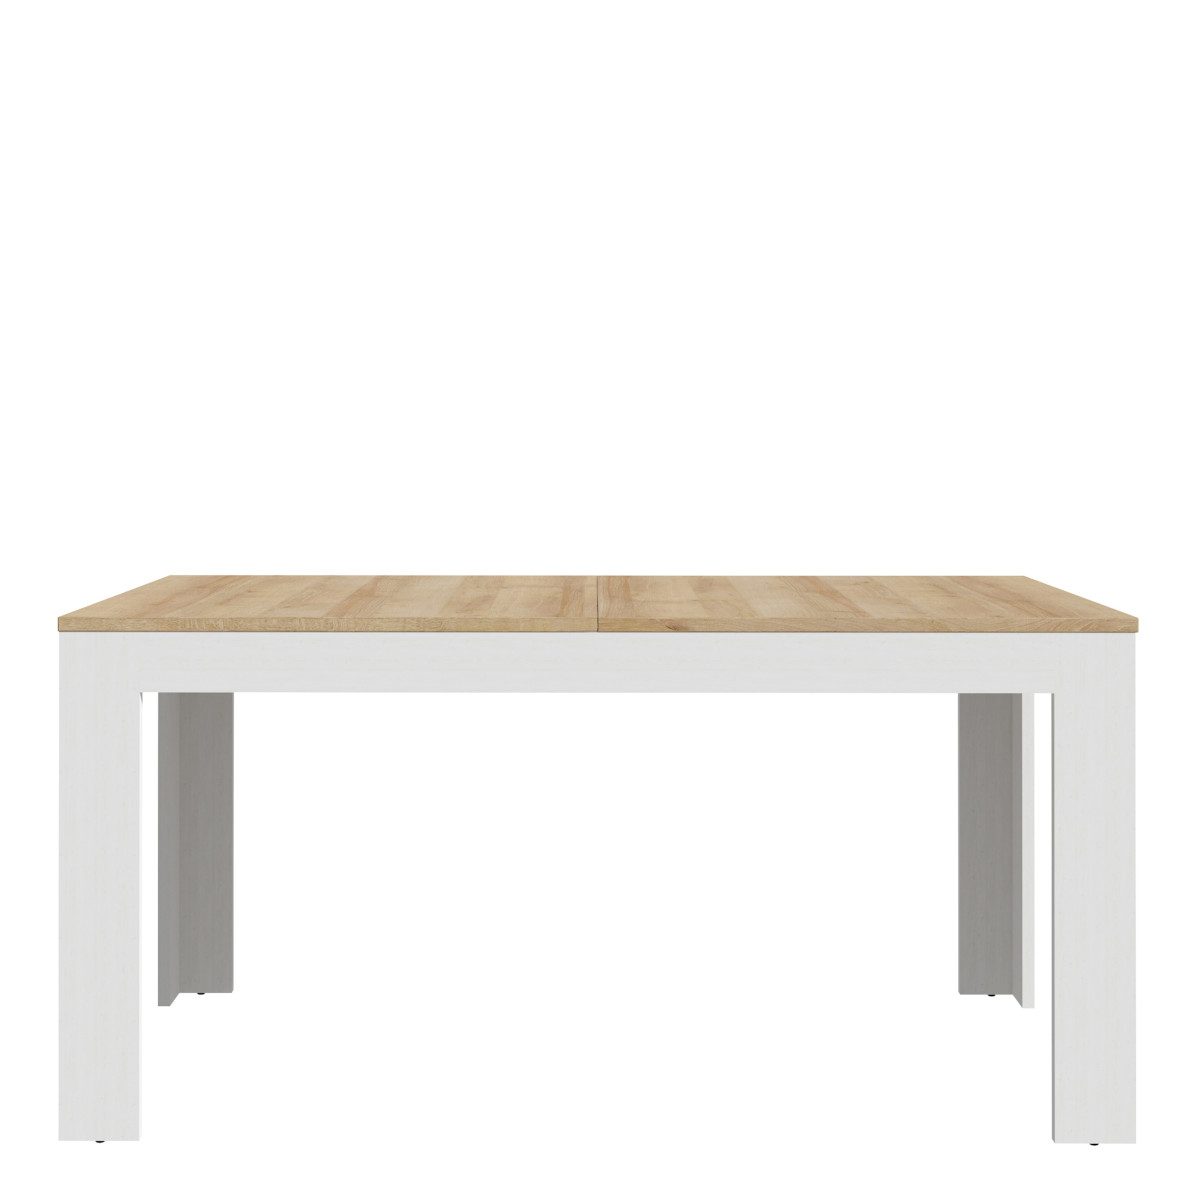 Bohol Extending Dining Table in Riviera Oak and White